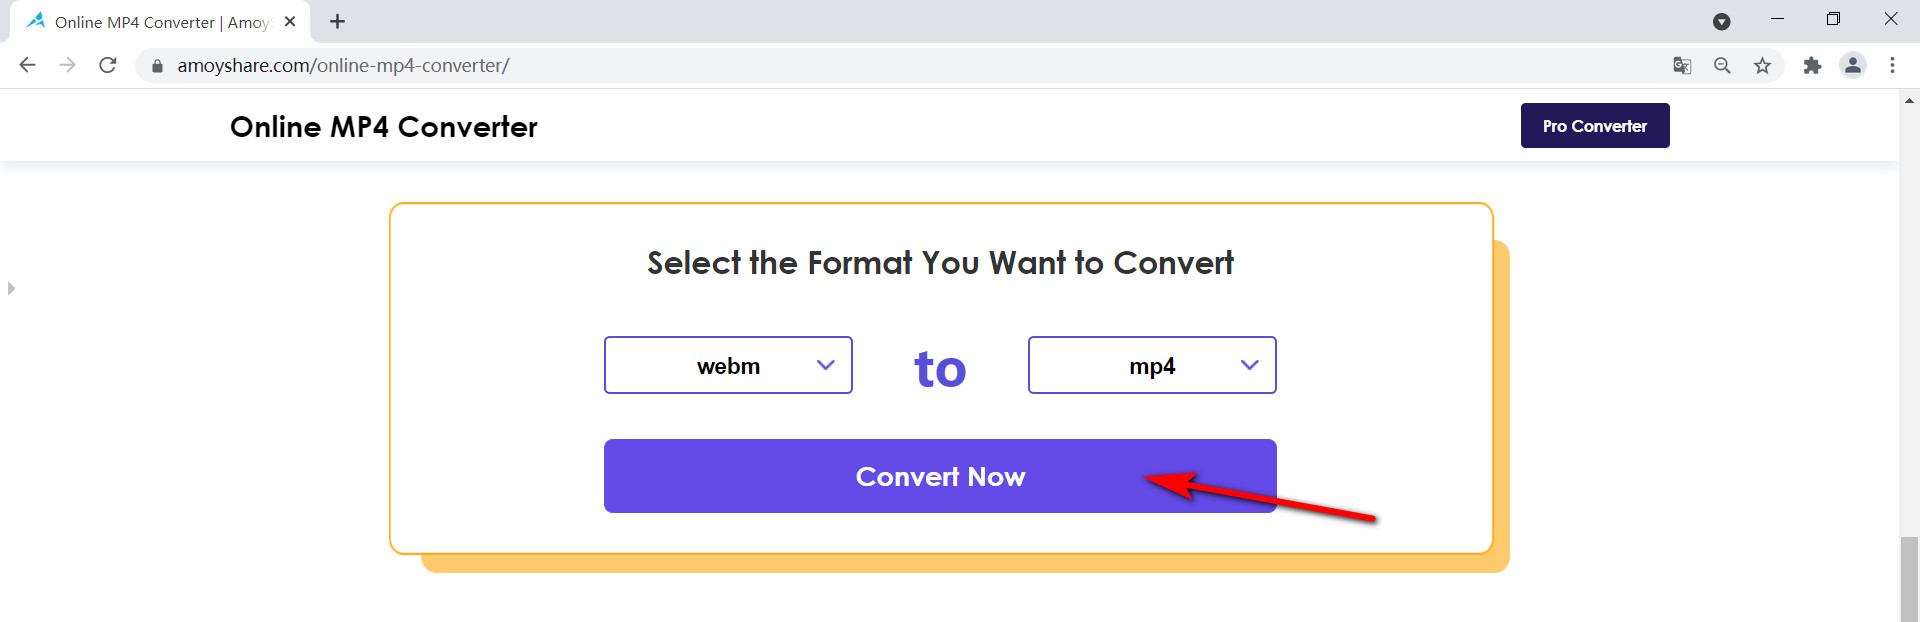 Click the Convert Now button to start converting